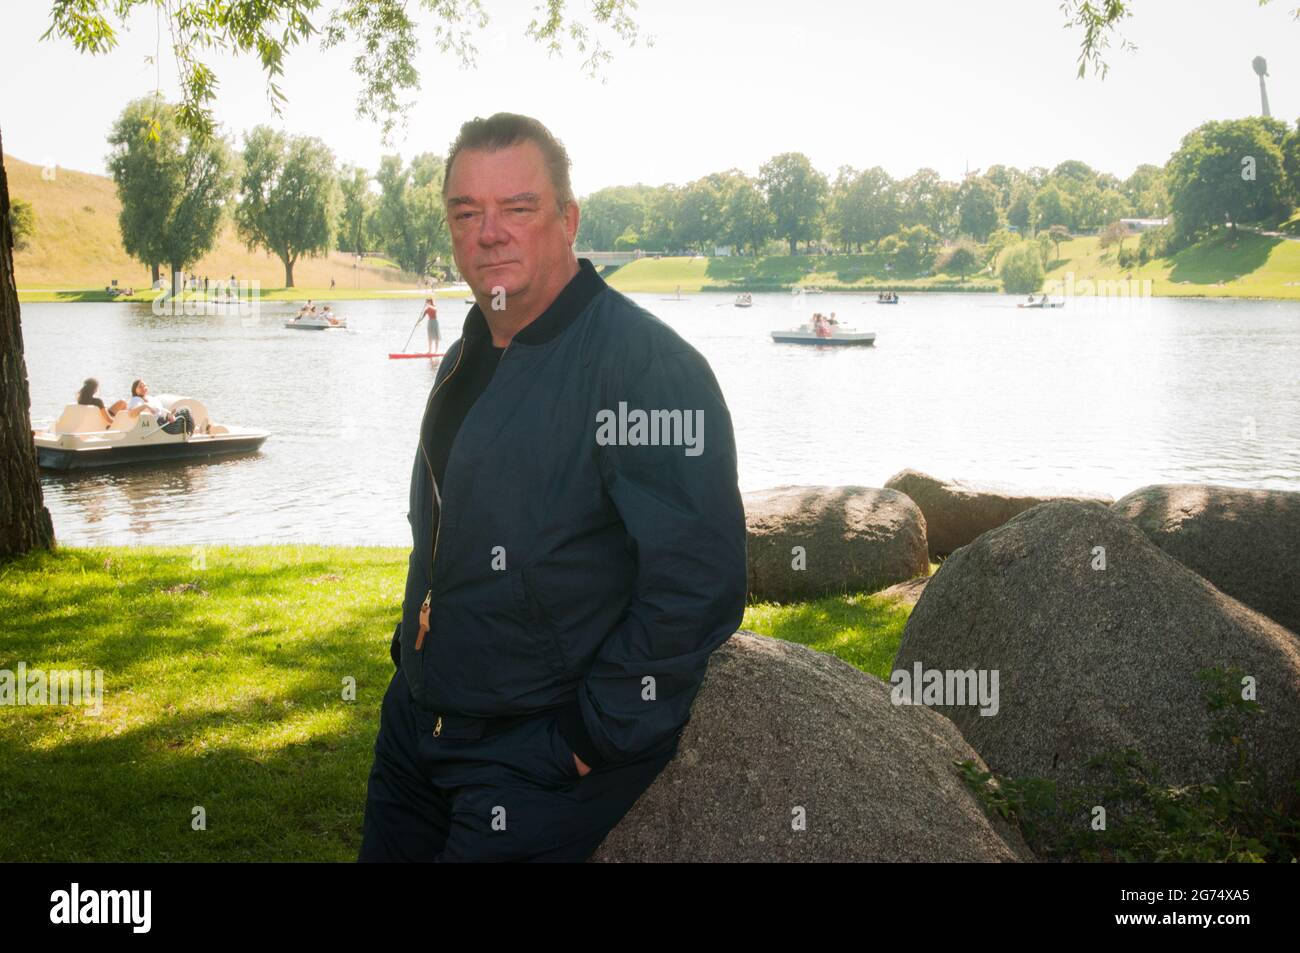 Actor Peter Kurth seen at 'Kino am Olympiasee' before the screening of his new series 'Glauben' from Ferdinand von Schirach during Filmfest München Stock Photo